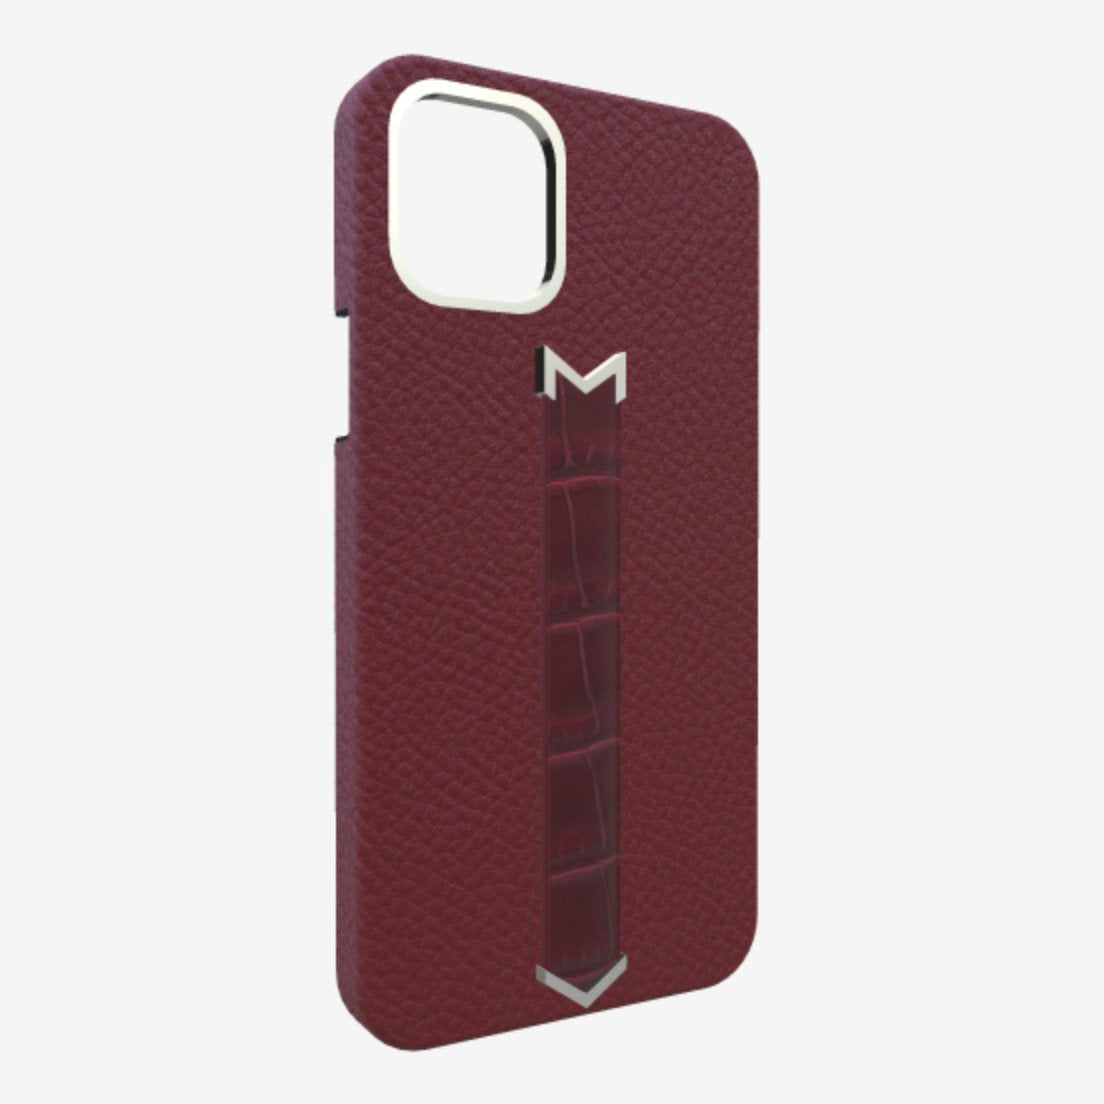 Silver Finger Strap Case for iPhone 13 Pro Max in Genuine Calfskin and Alligator Burgundy-Palace Burgundy-Palace 